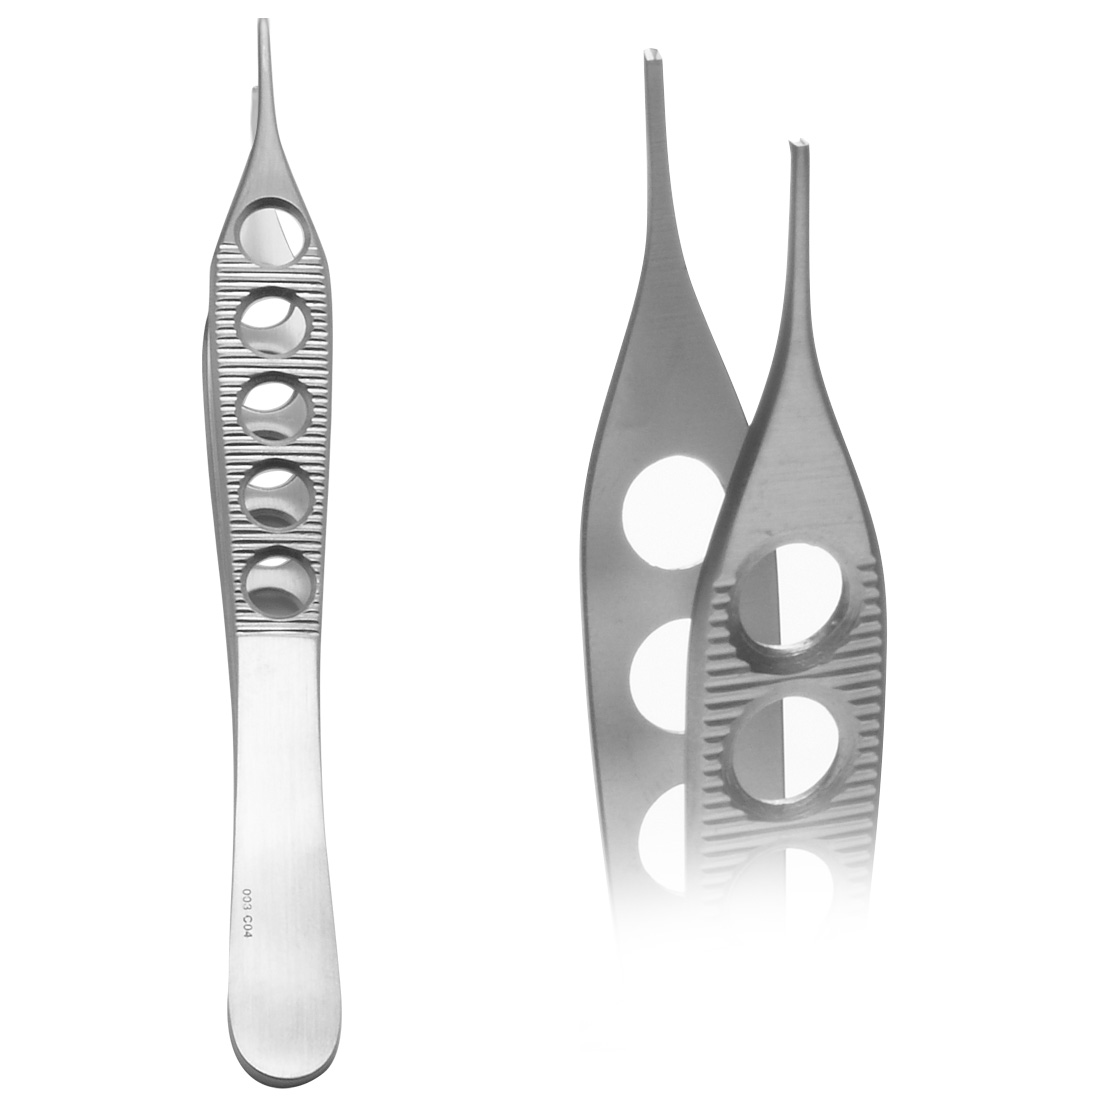 ACE Adson Thumb Grip Forceps, delicate, serrated